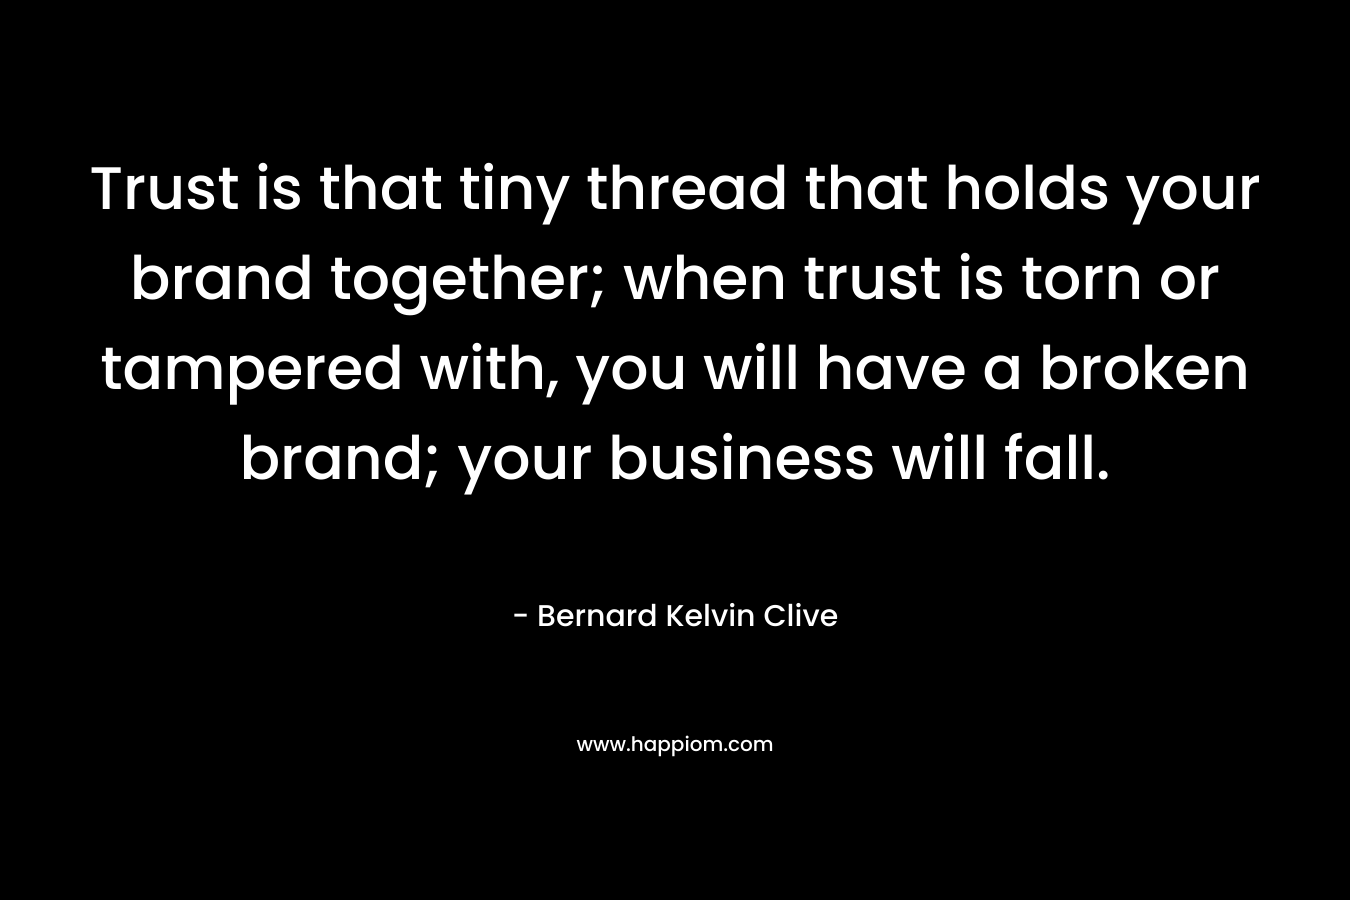 Trust is that tiny thread that holds your brand together; when trust is torn or tampered with, you will have a broken brand; your business will fall.